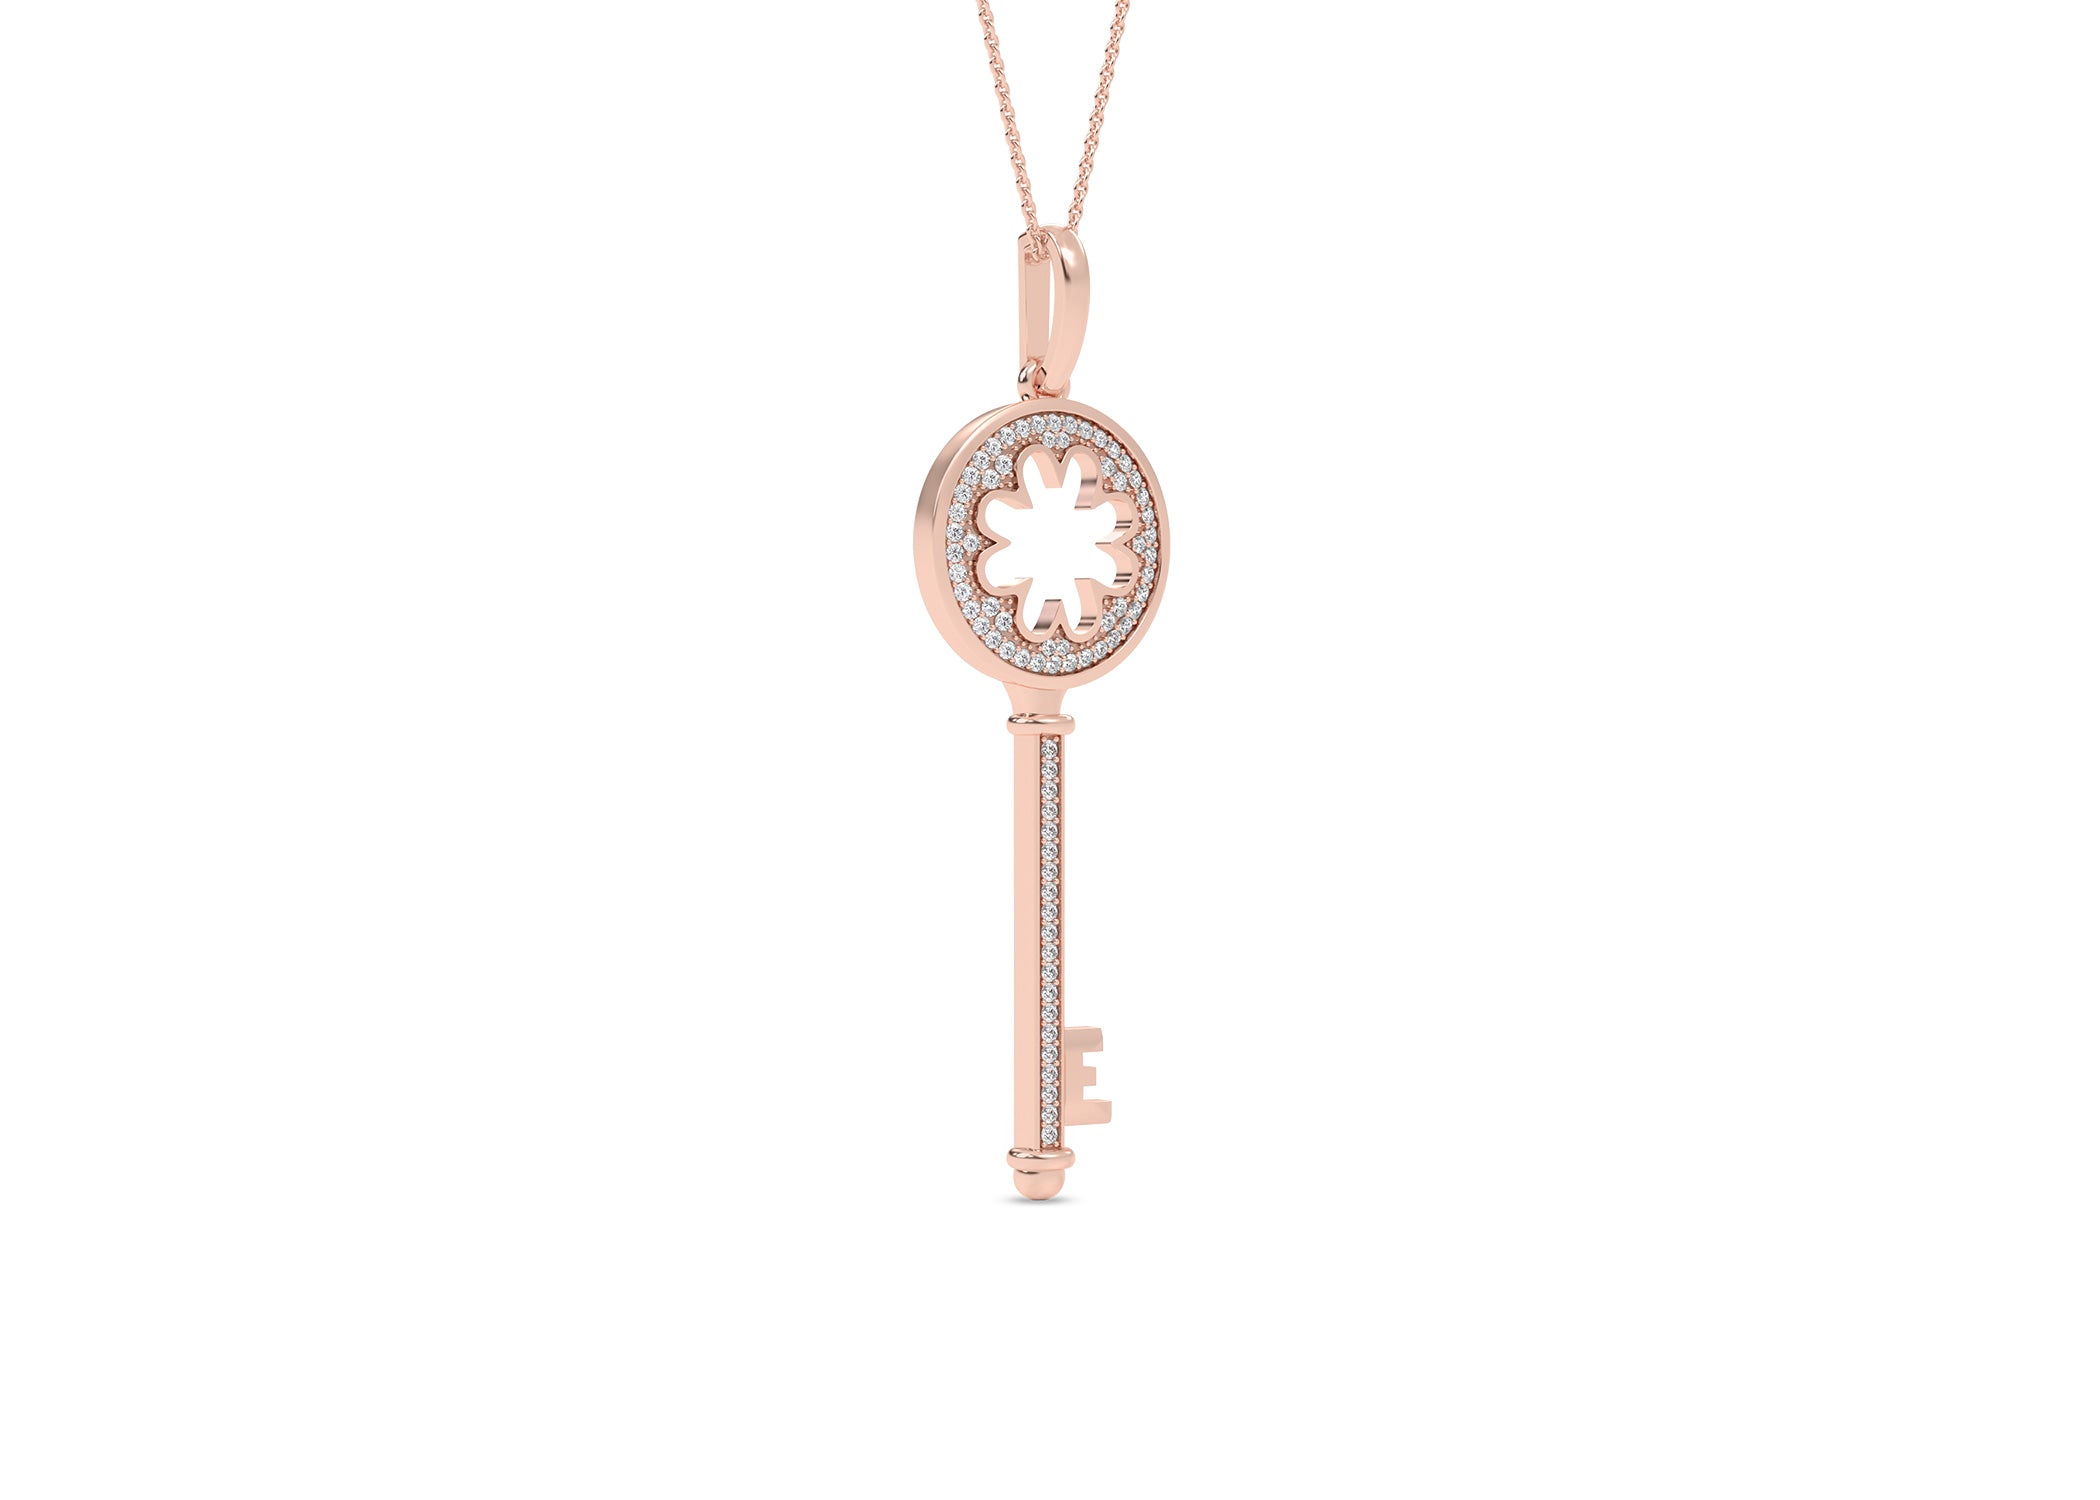 Blooming Key Necklace - Necklace 